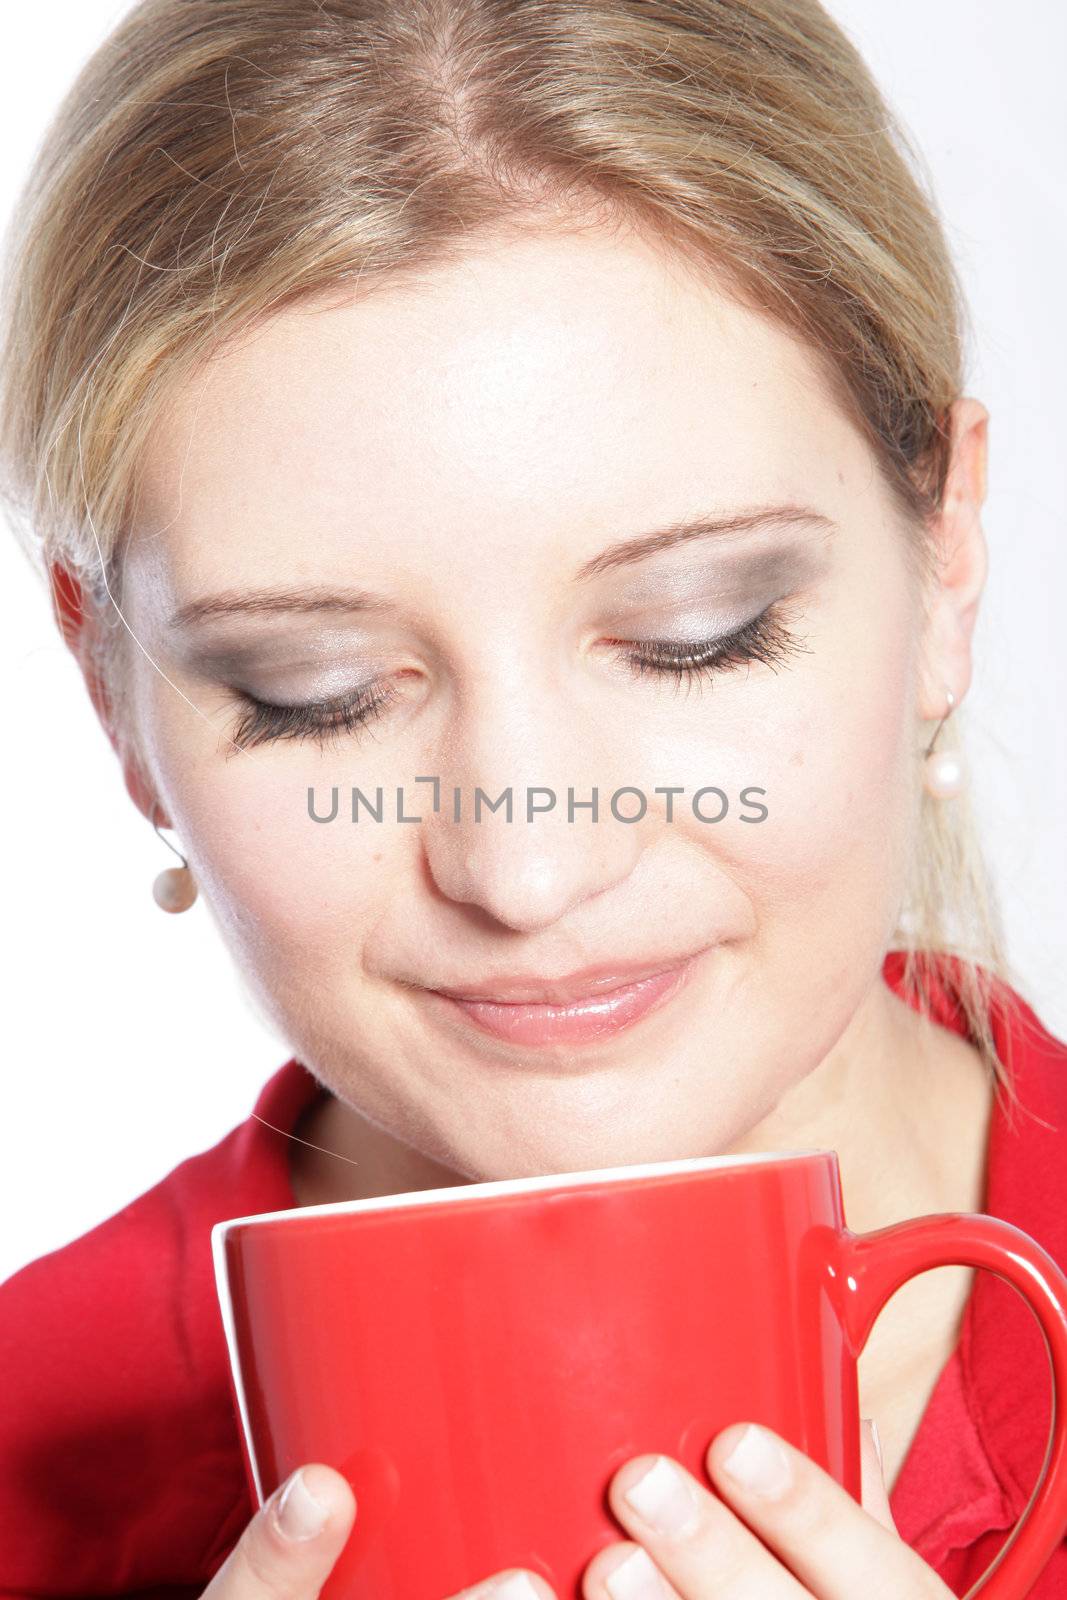 Attractive young blonde woman enjoying a mug of coffee smelling the aroma with her eyes closed in bliss